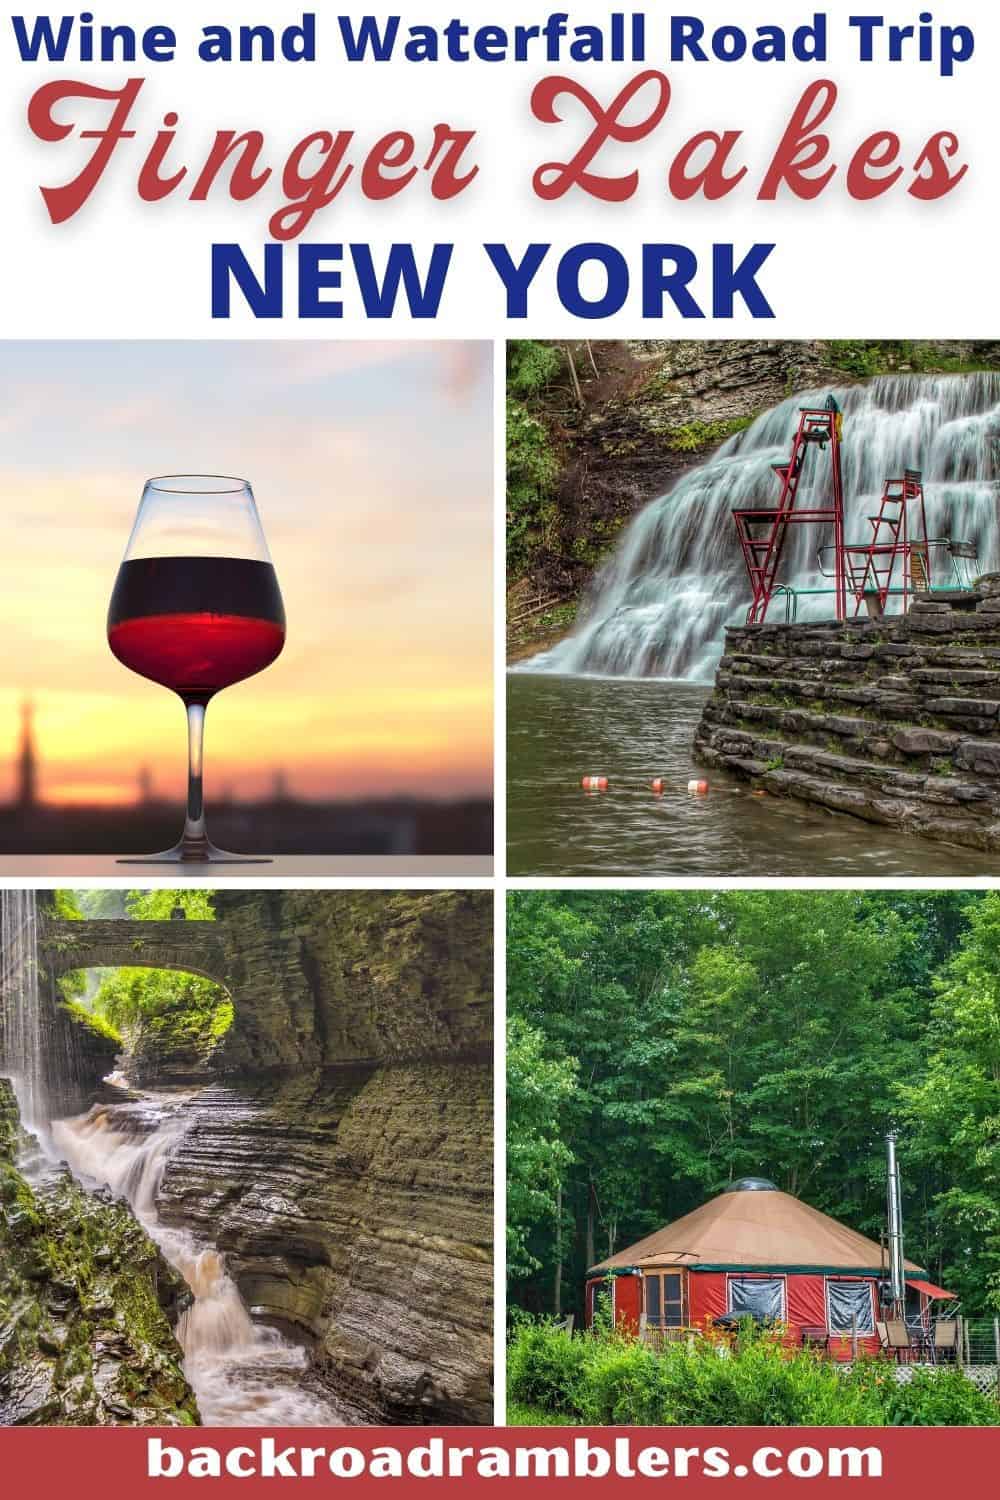 A collage of photos featuring wine and waterfalls in the Finger Lakes of New York. Text overlay: Wine and Waterfall Road Trip in the Finger Lakes of New York.